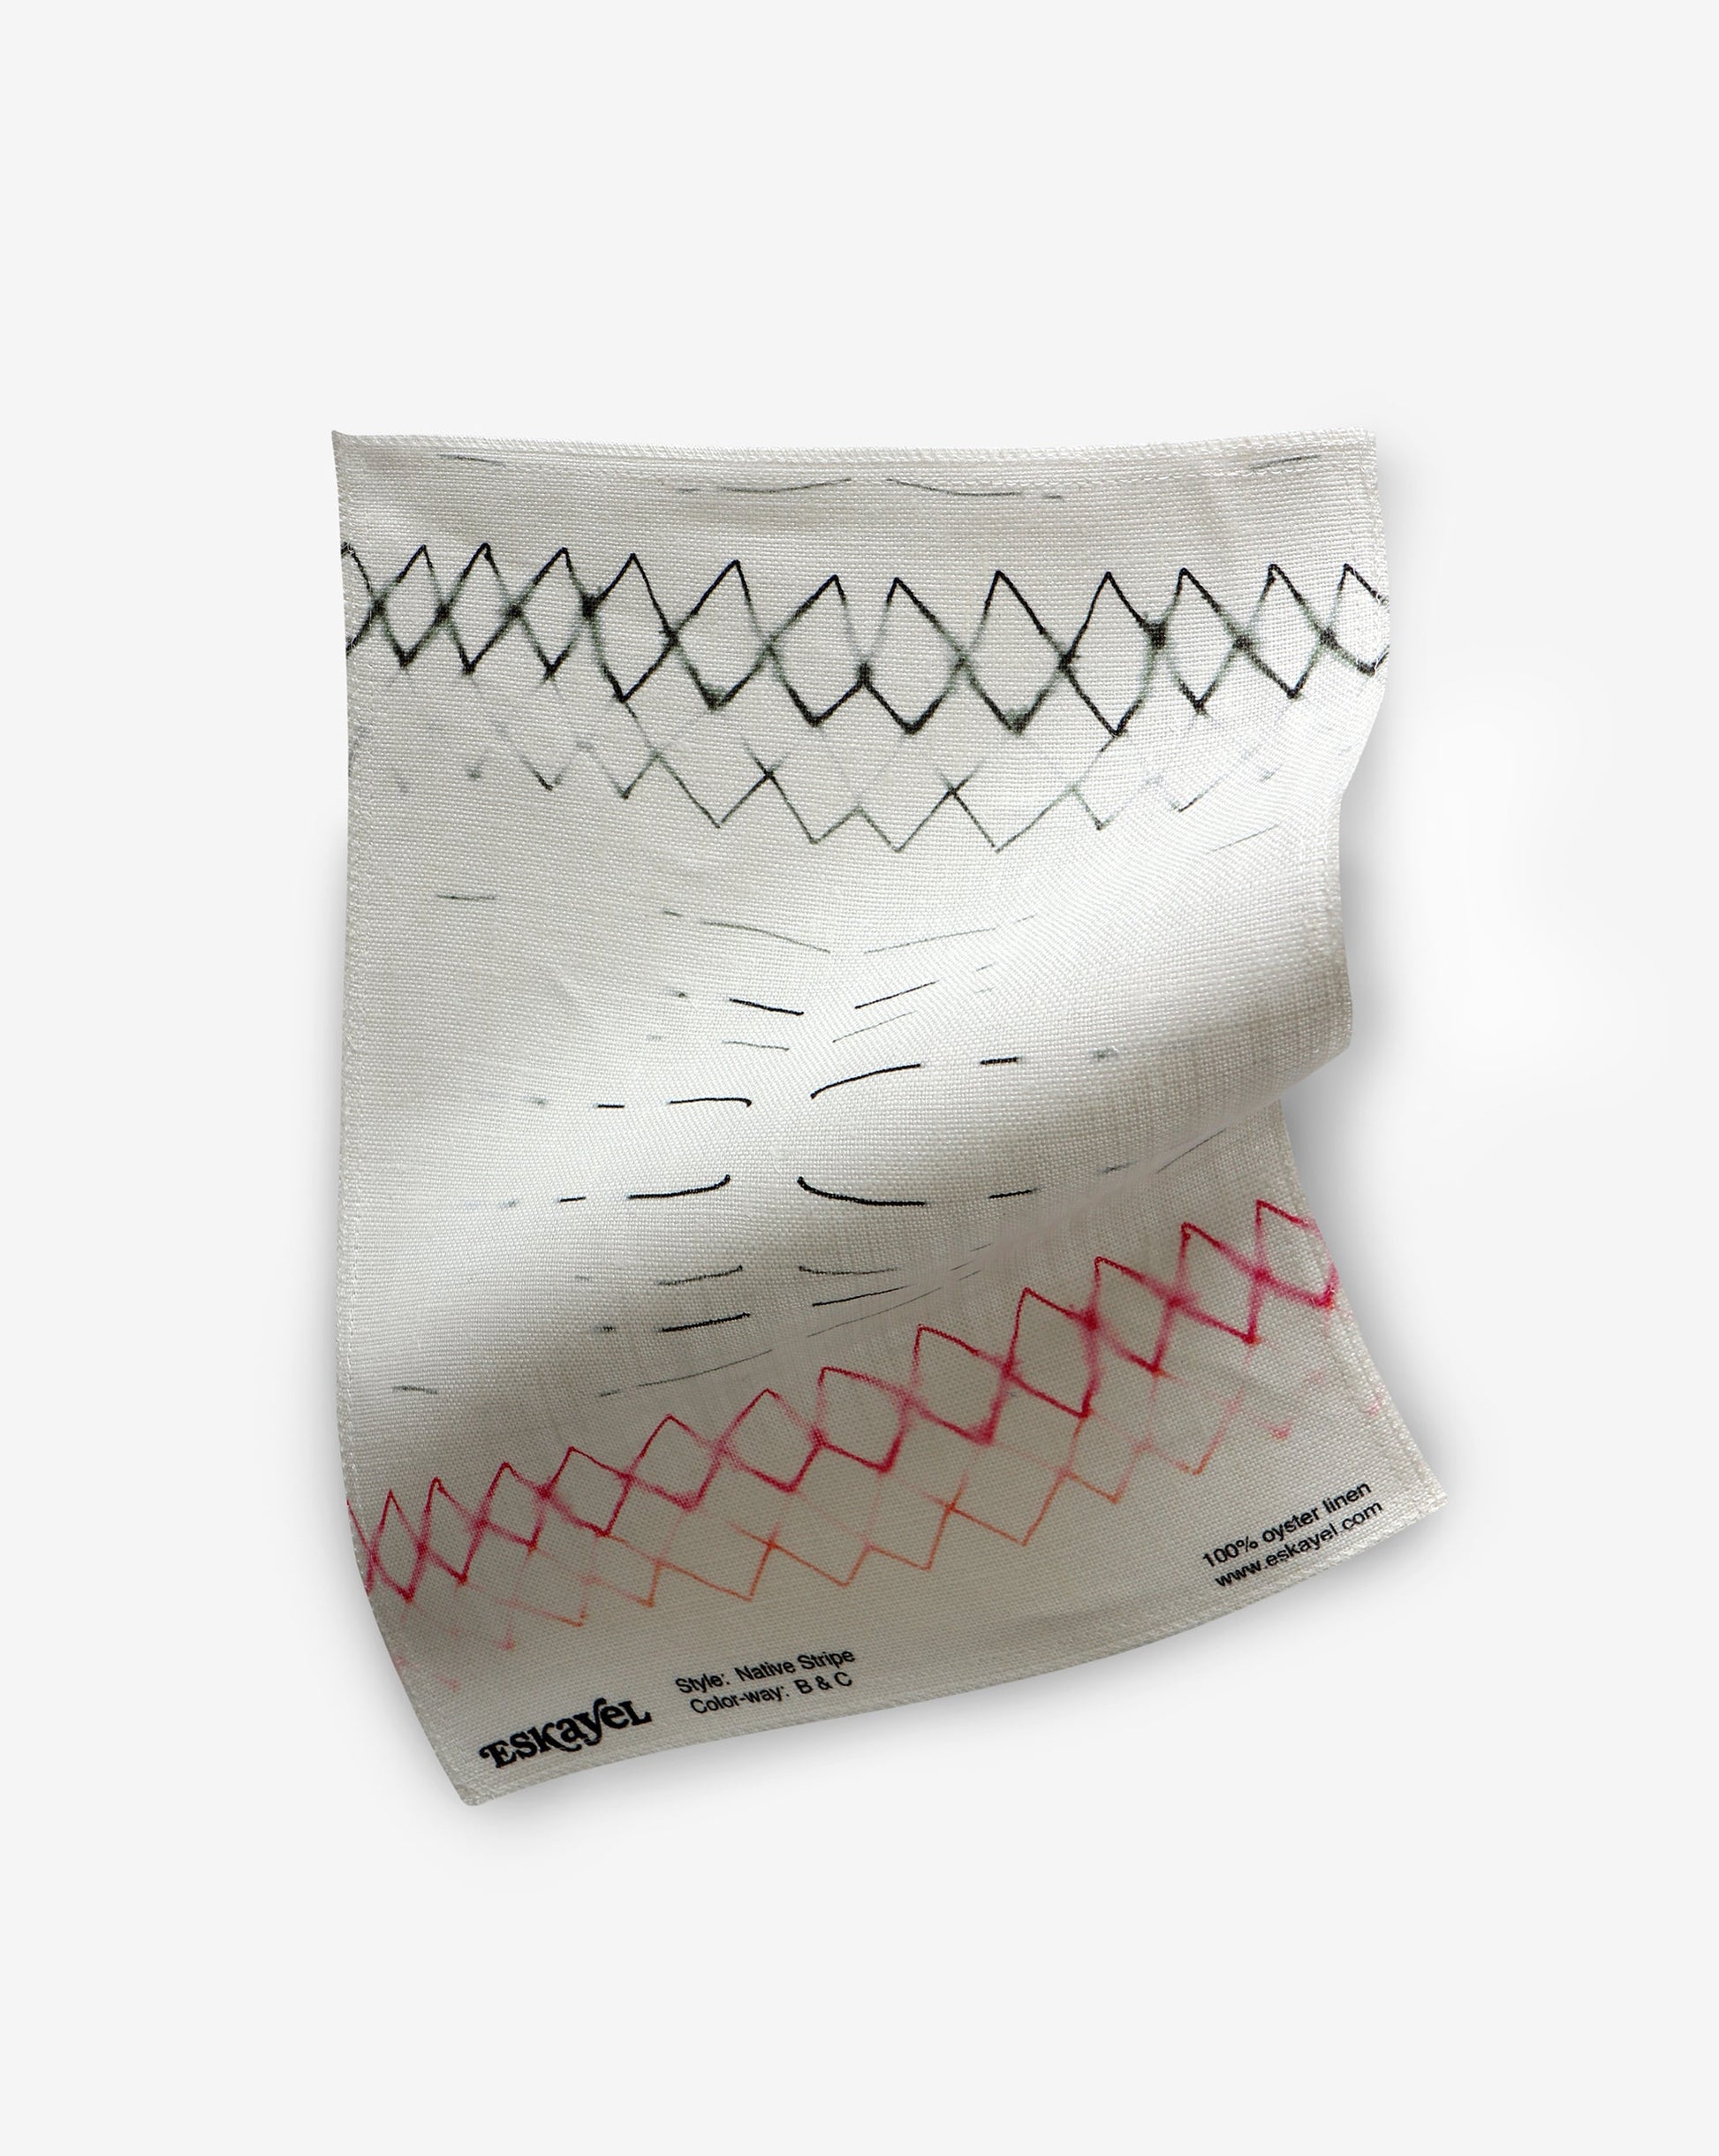 A white fabric with a graphic pattern of Native Stripe Fabric Black + Crimson stripes on it